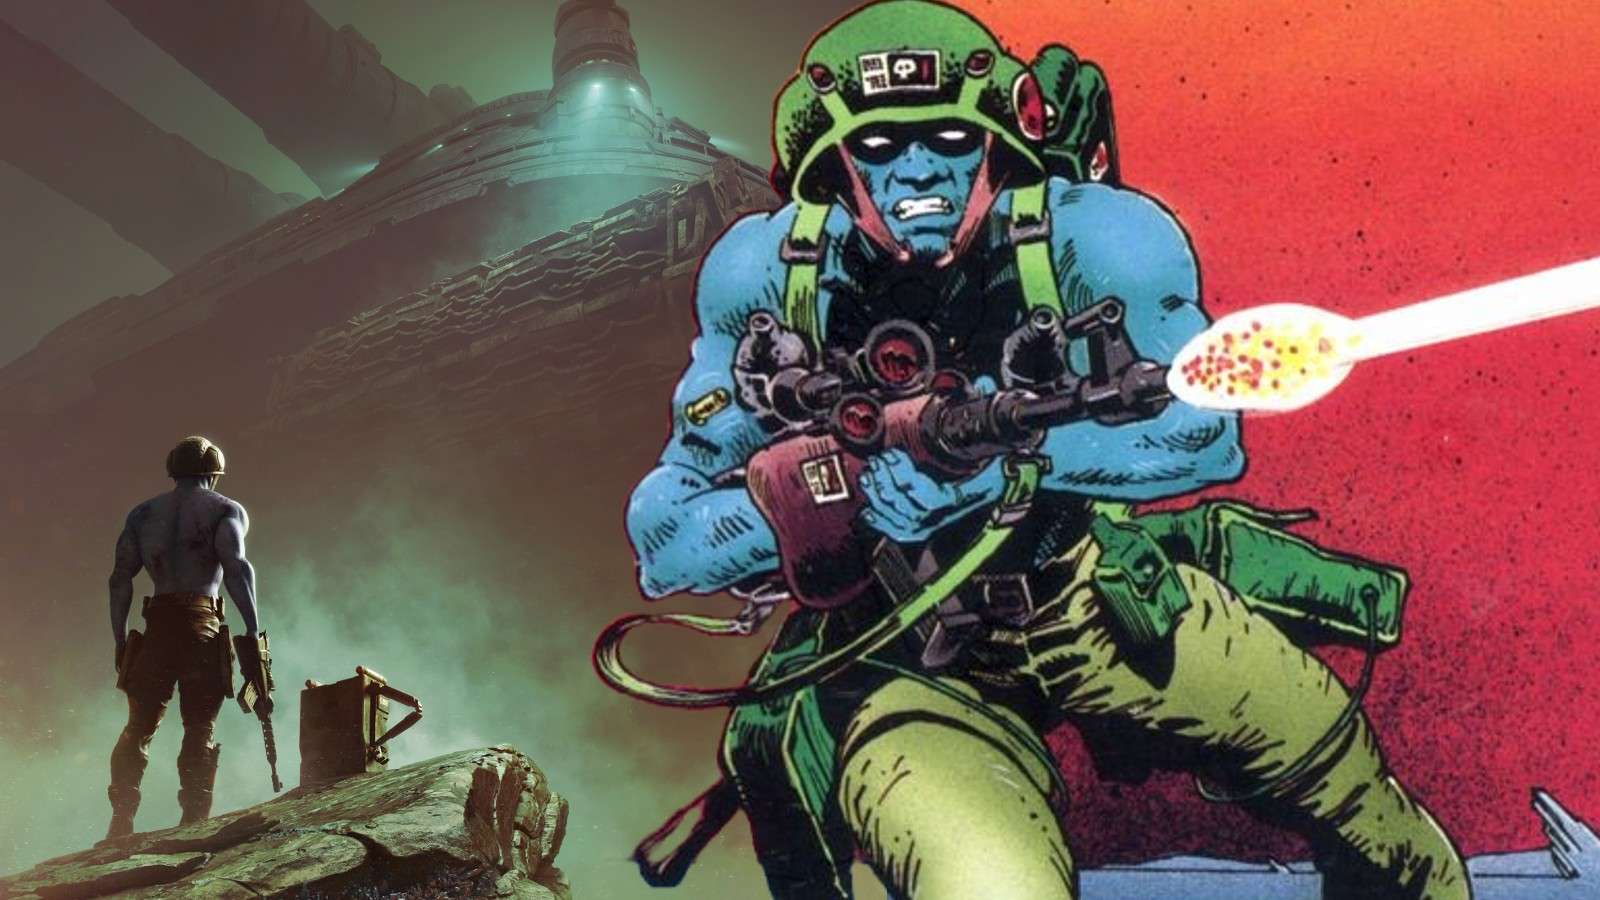 A still from the Rogue Trooper movie and the comics